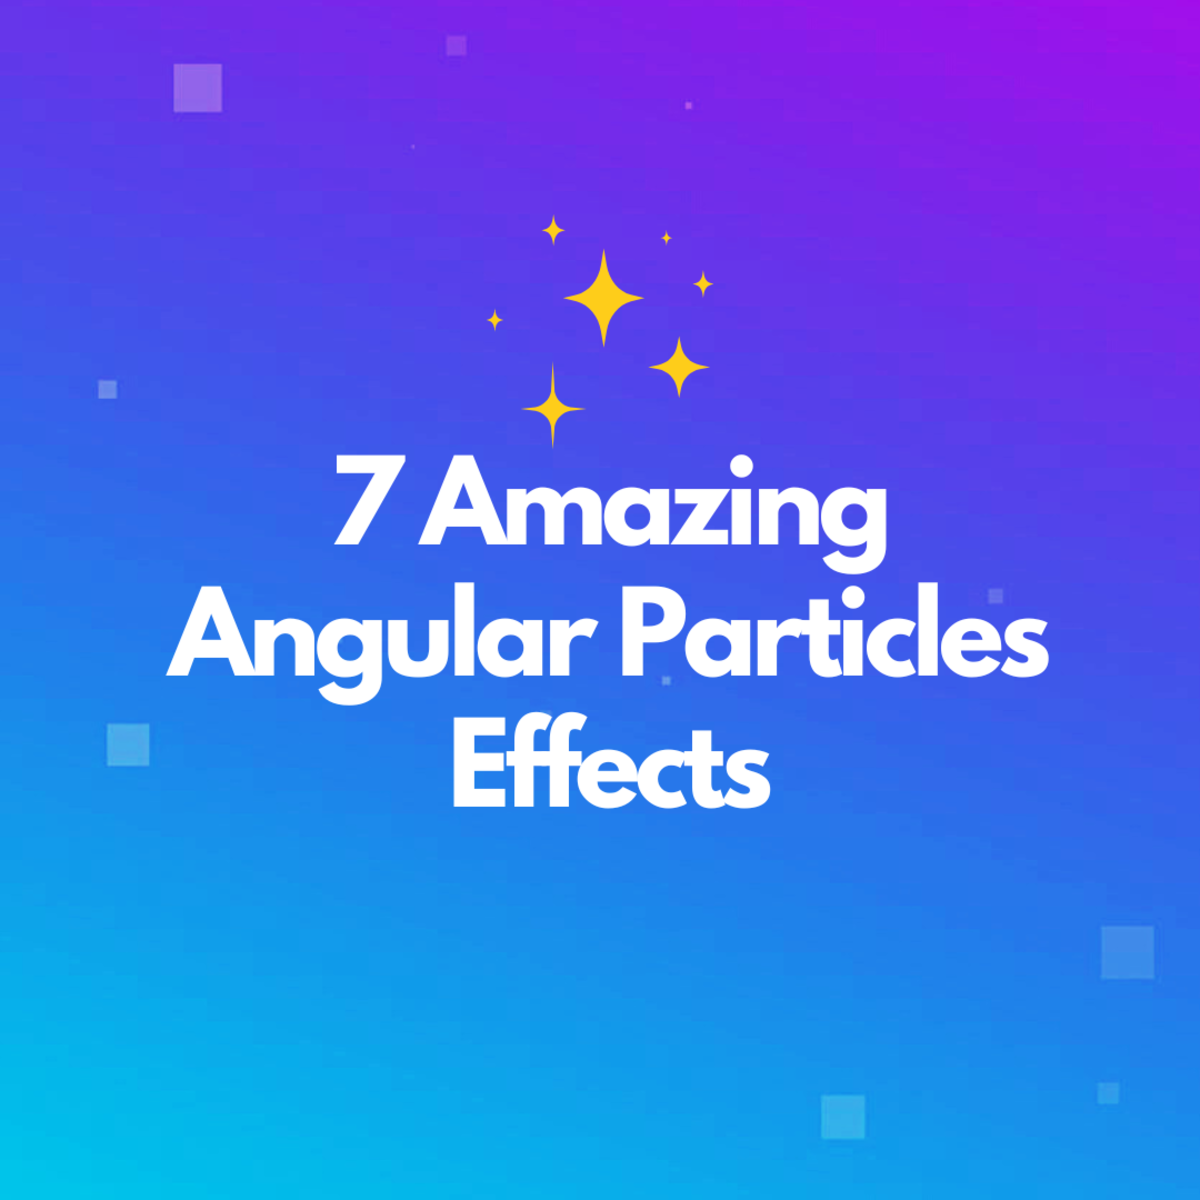 7 Stunning Angular Particles Effects to Check Out